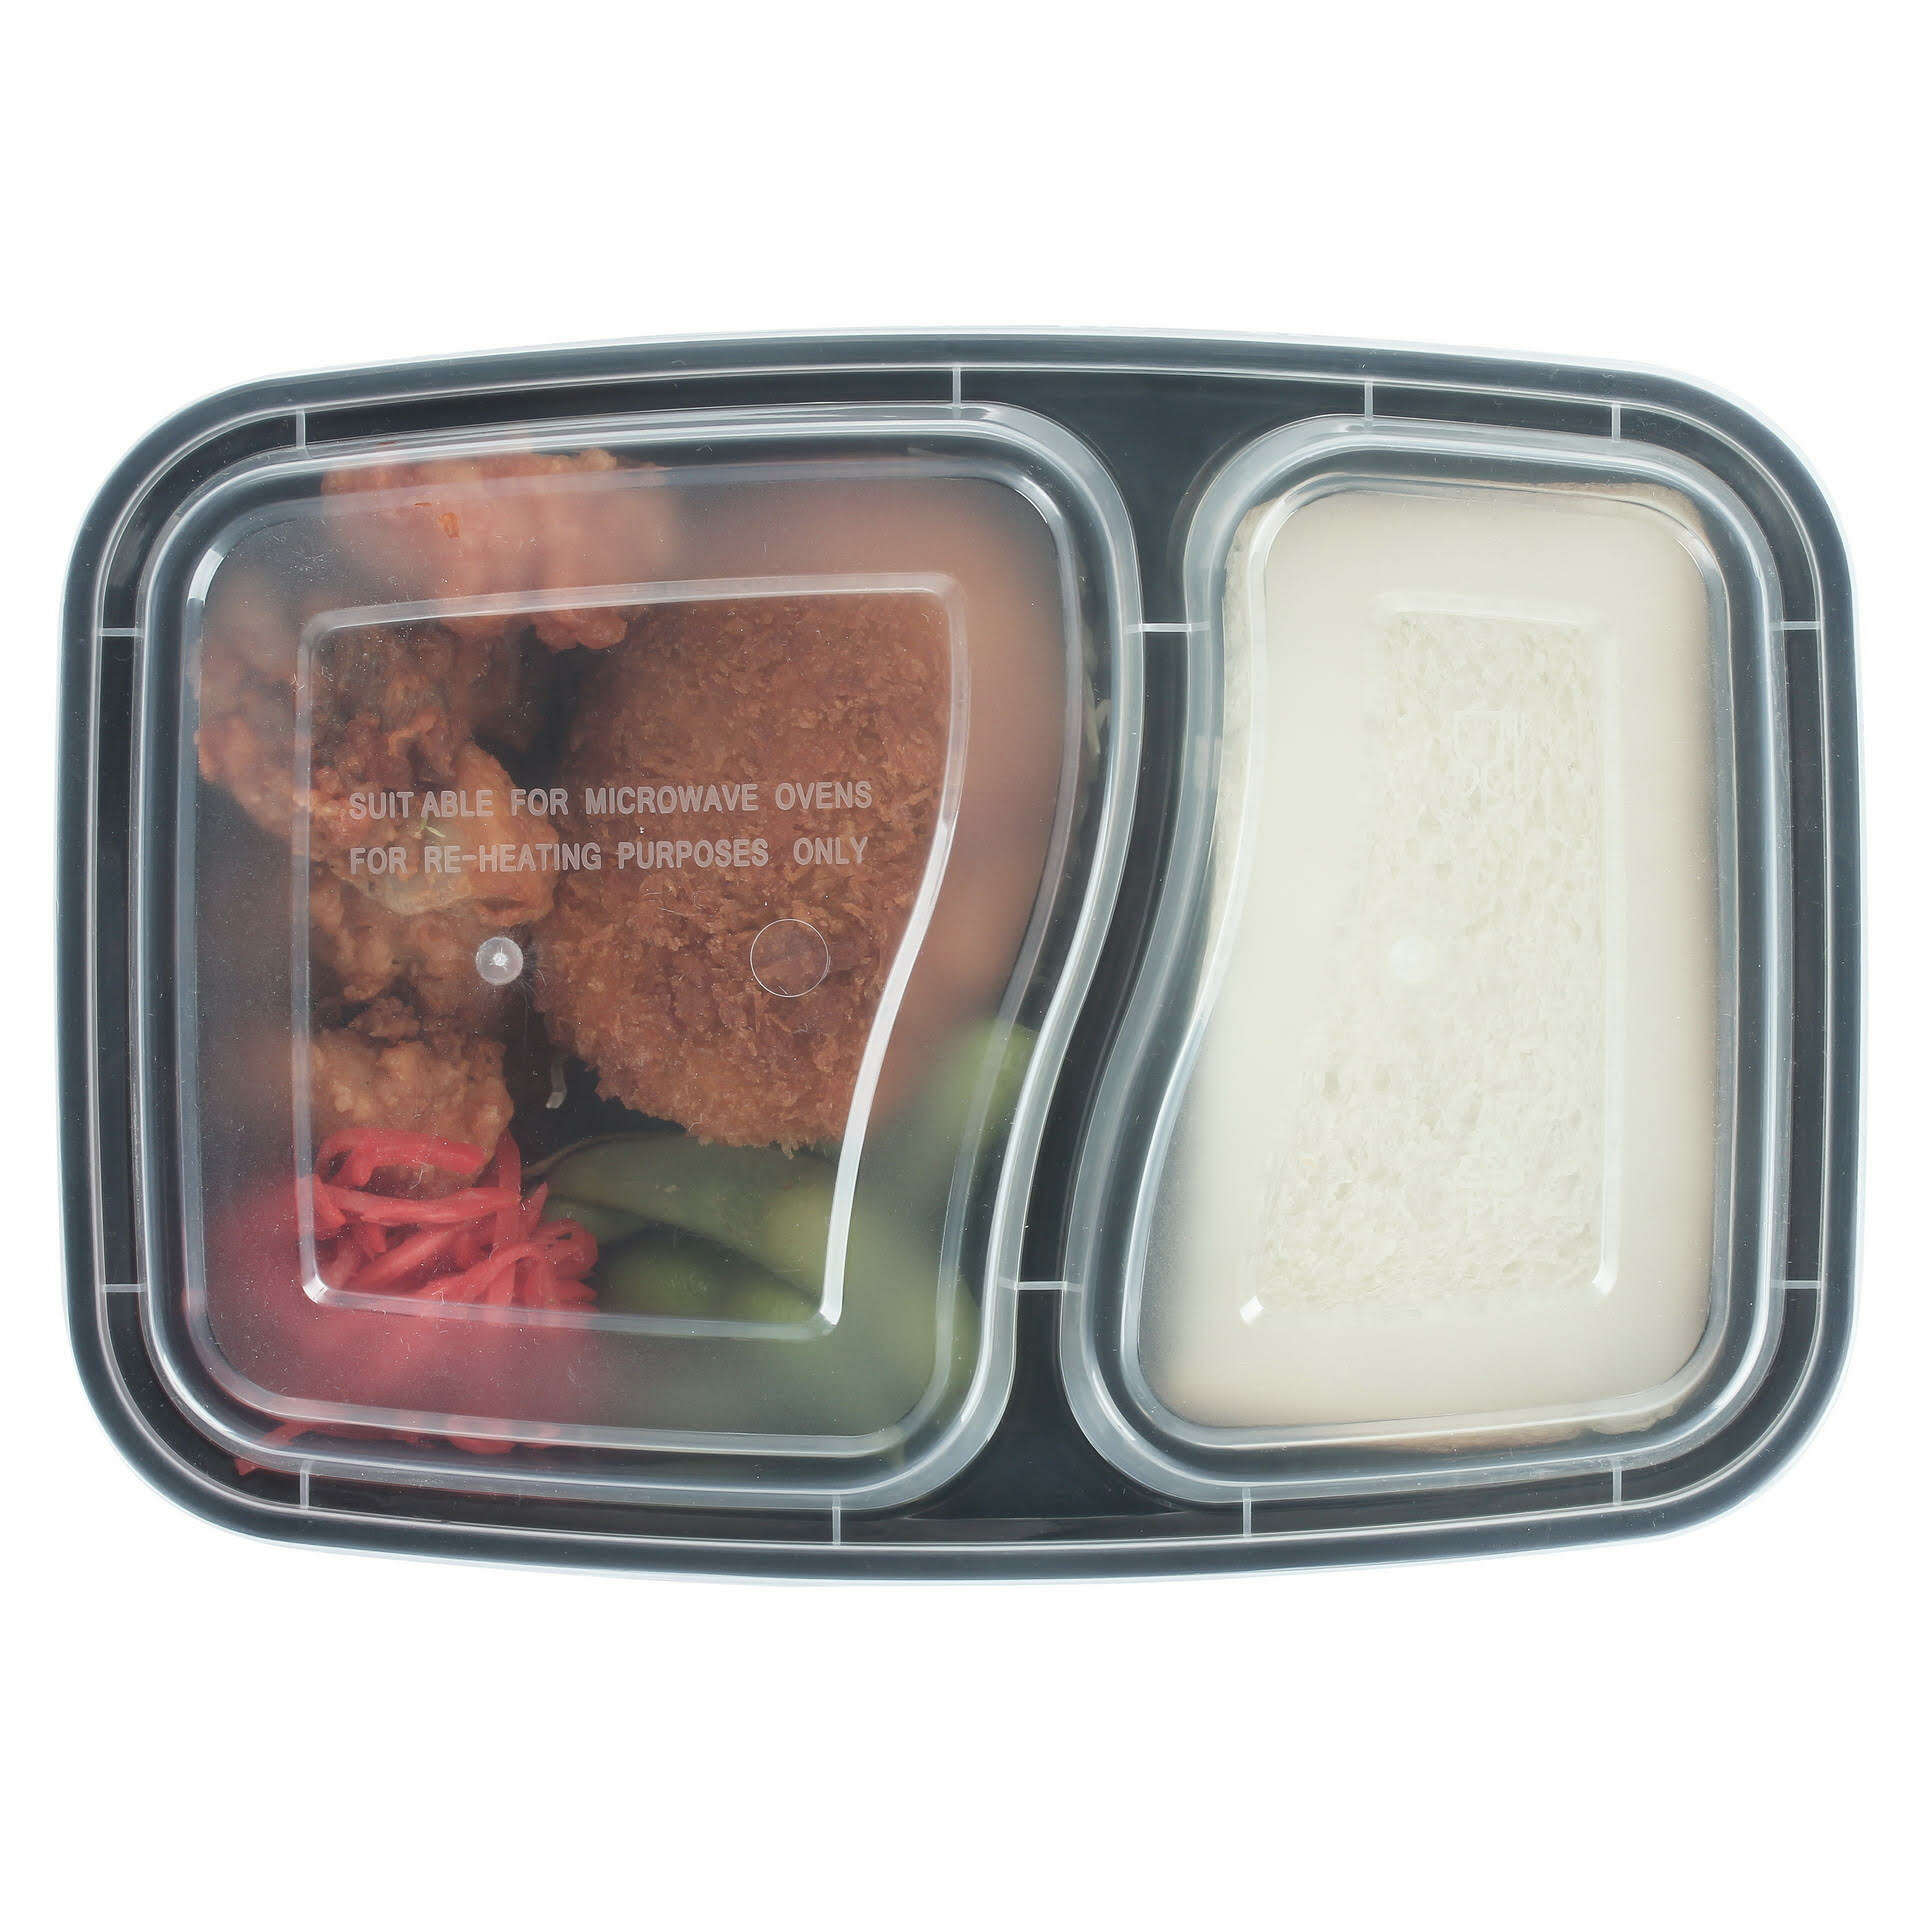 INEVIFIT Meal Prep Single Compartment 10 Container Food Storage Set